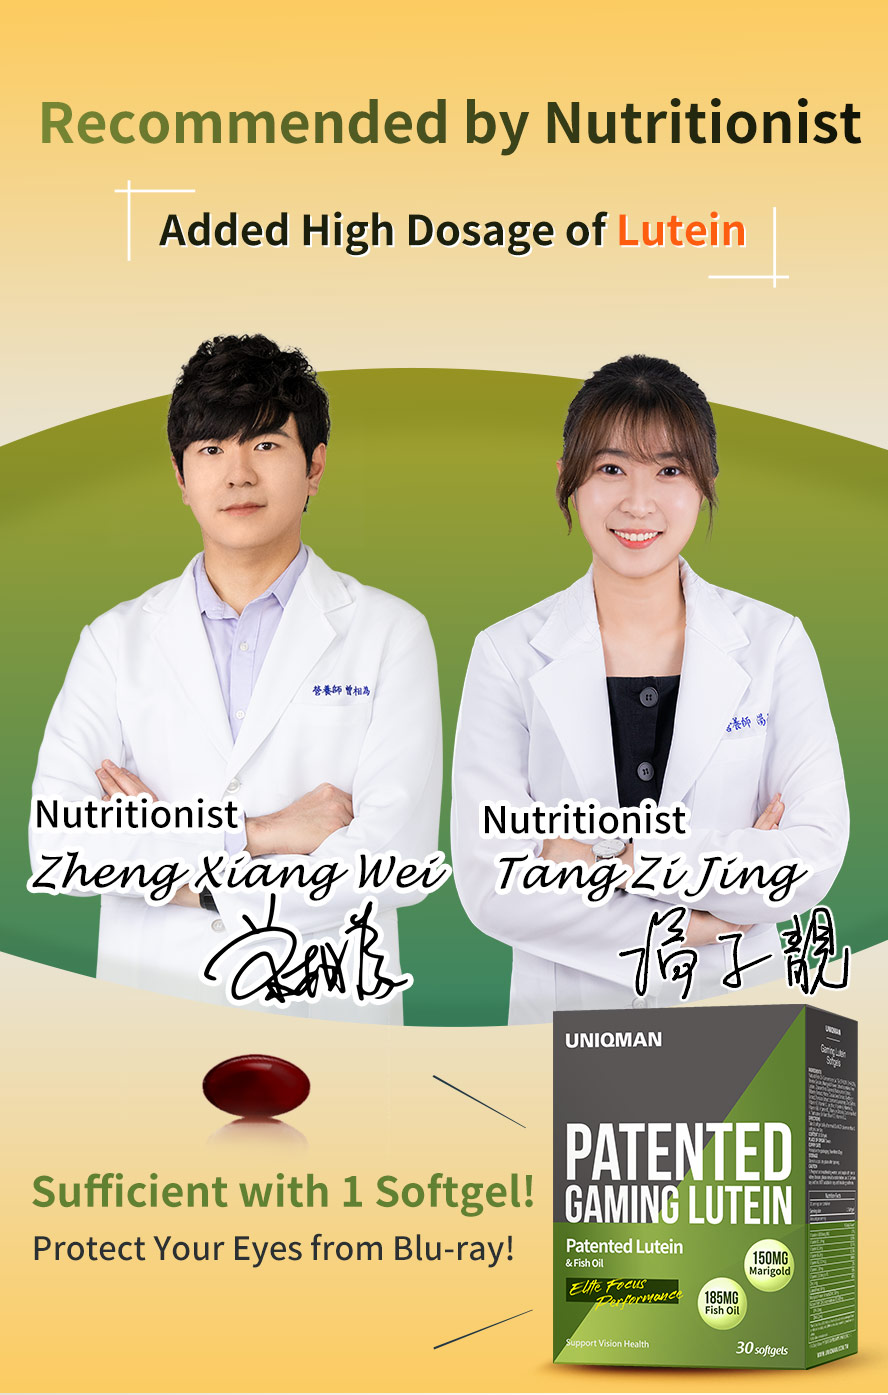 UNIQMAN Patented Gaming Lutein is recommended by nutritionists.